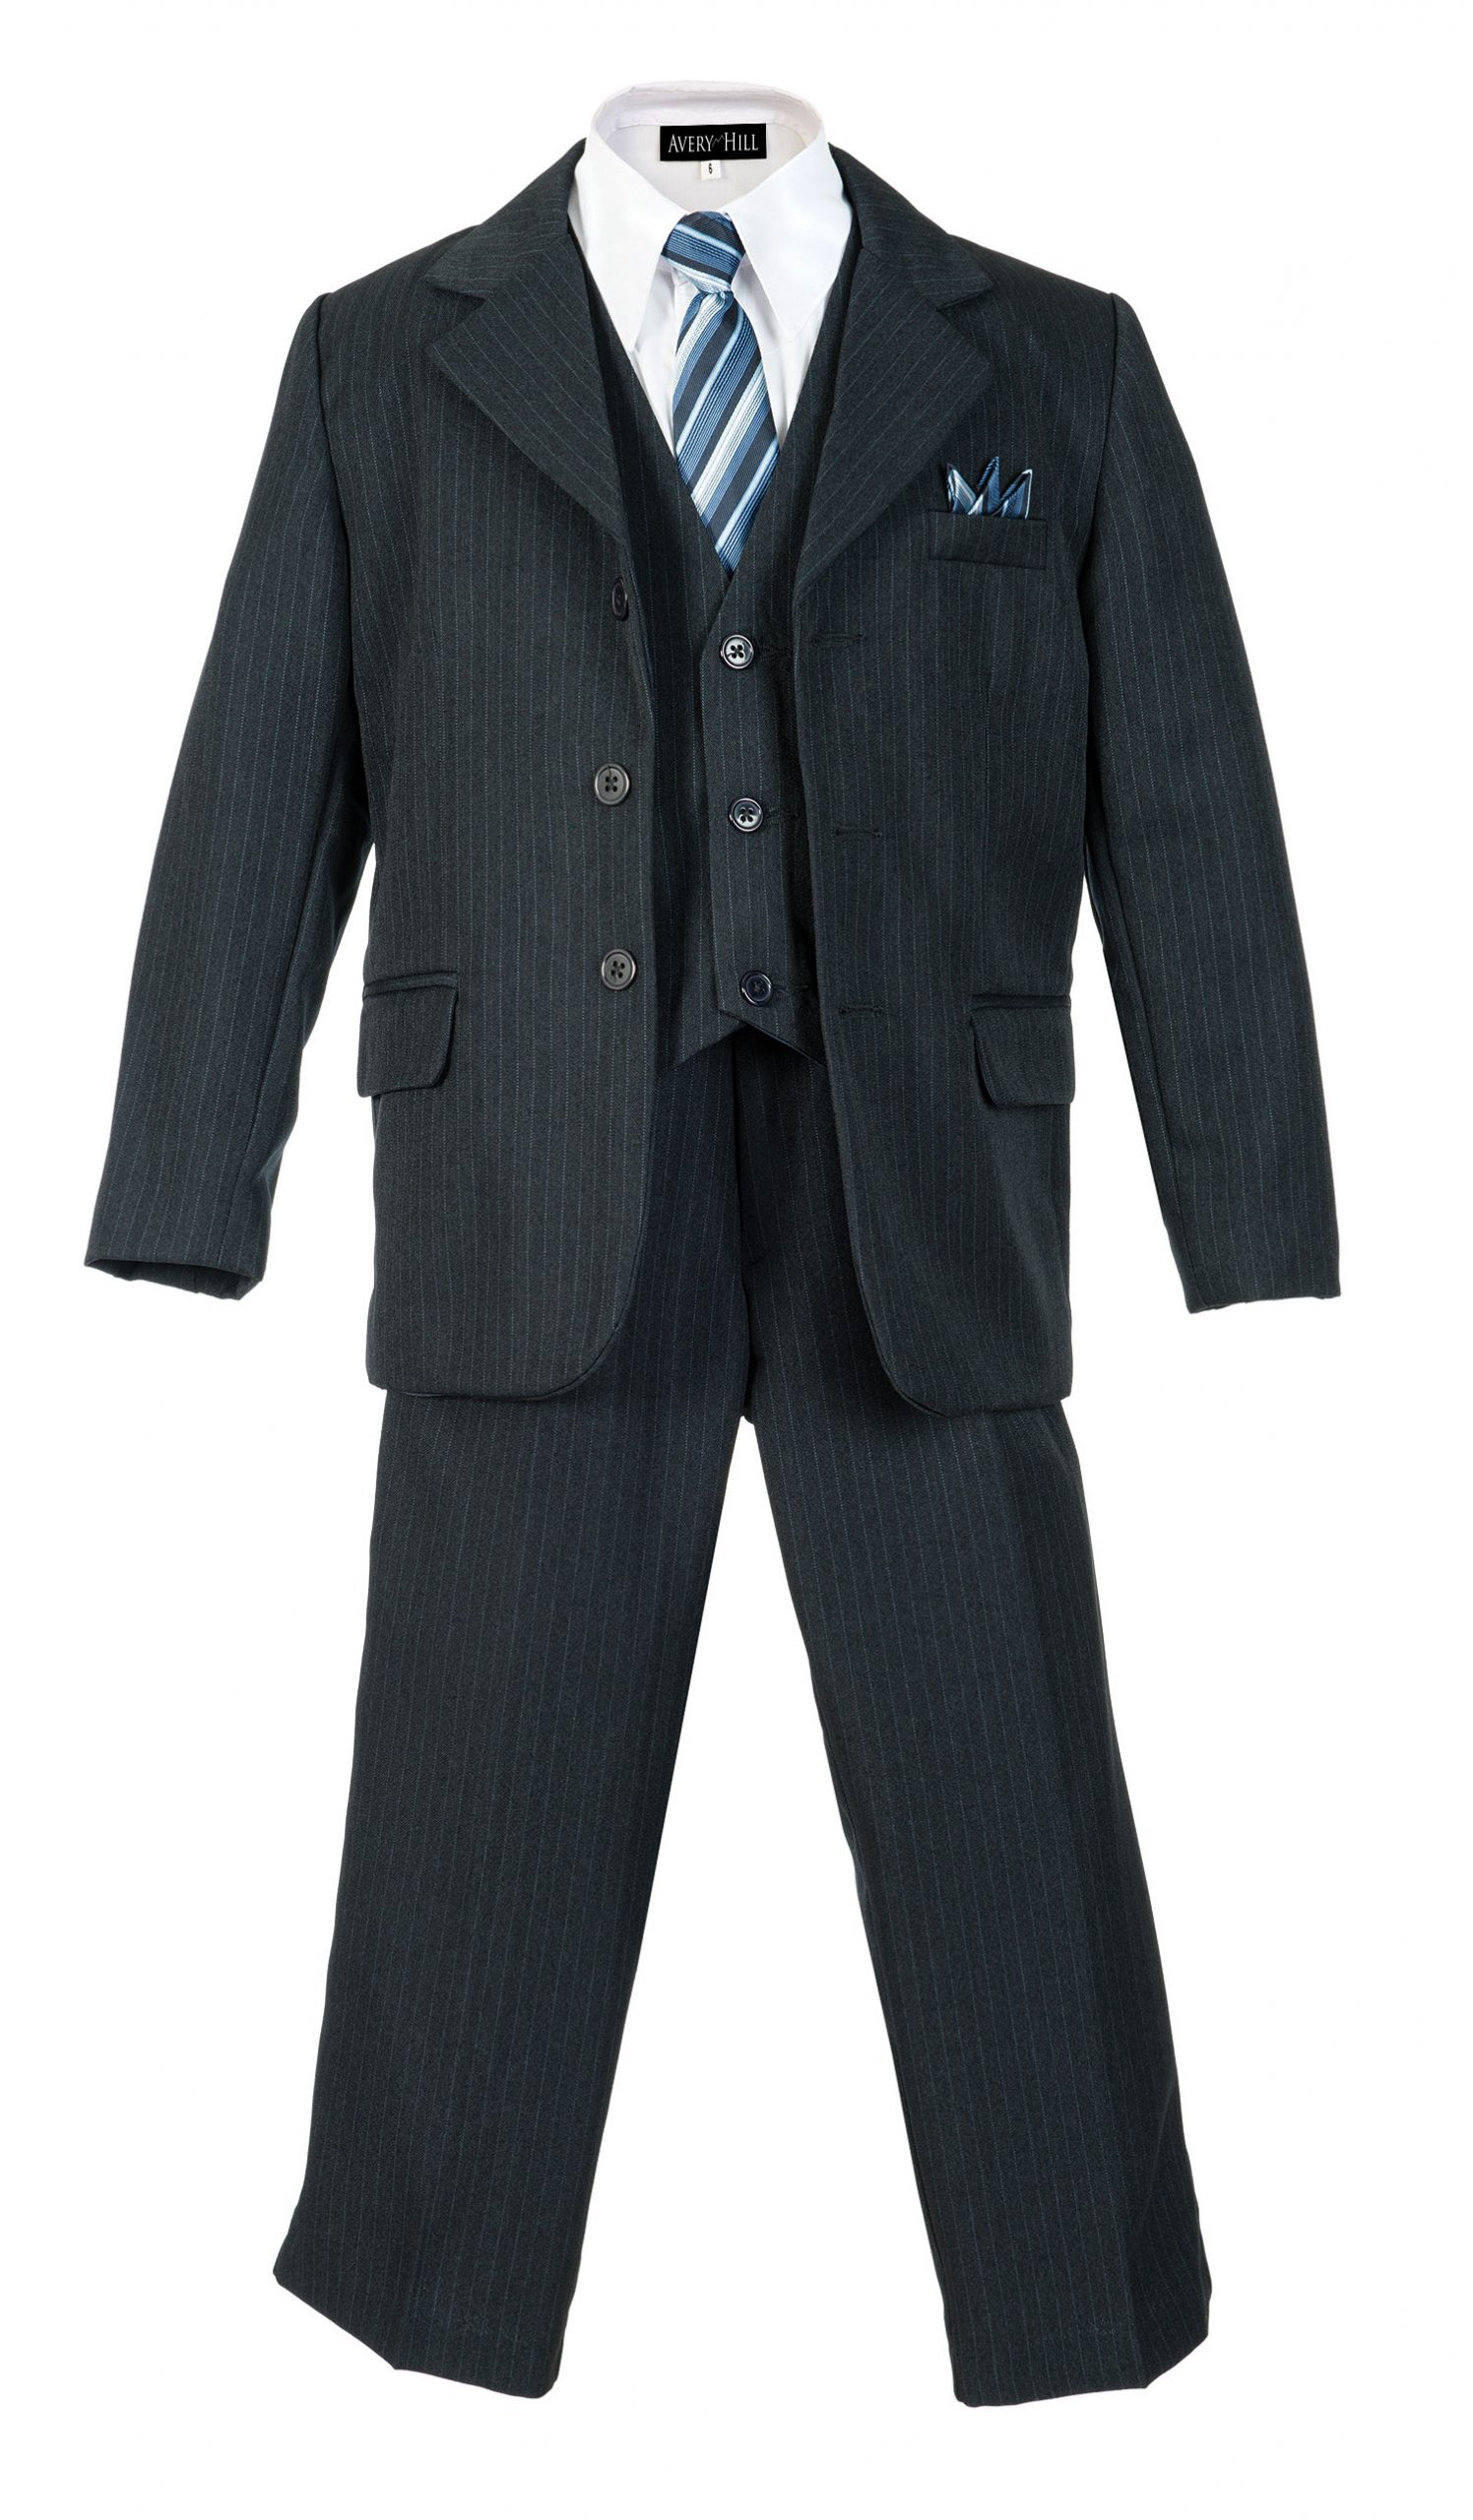 Boys Pinstripe Suit Set with Matching Tie NB 4T